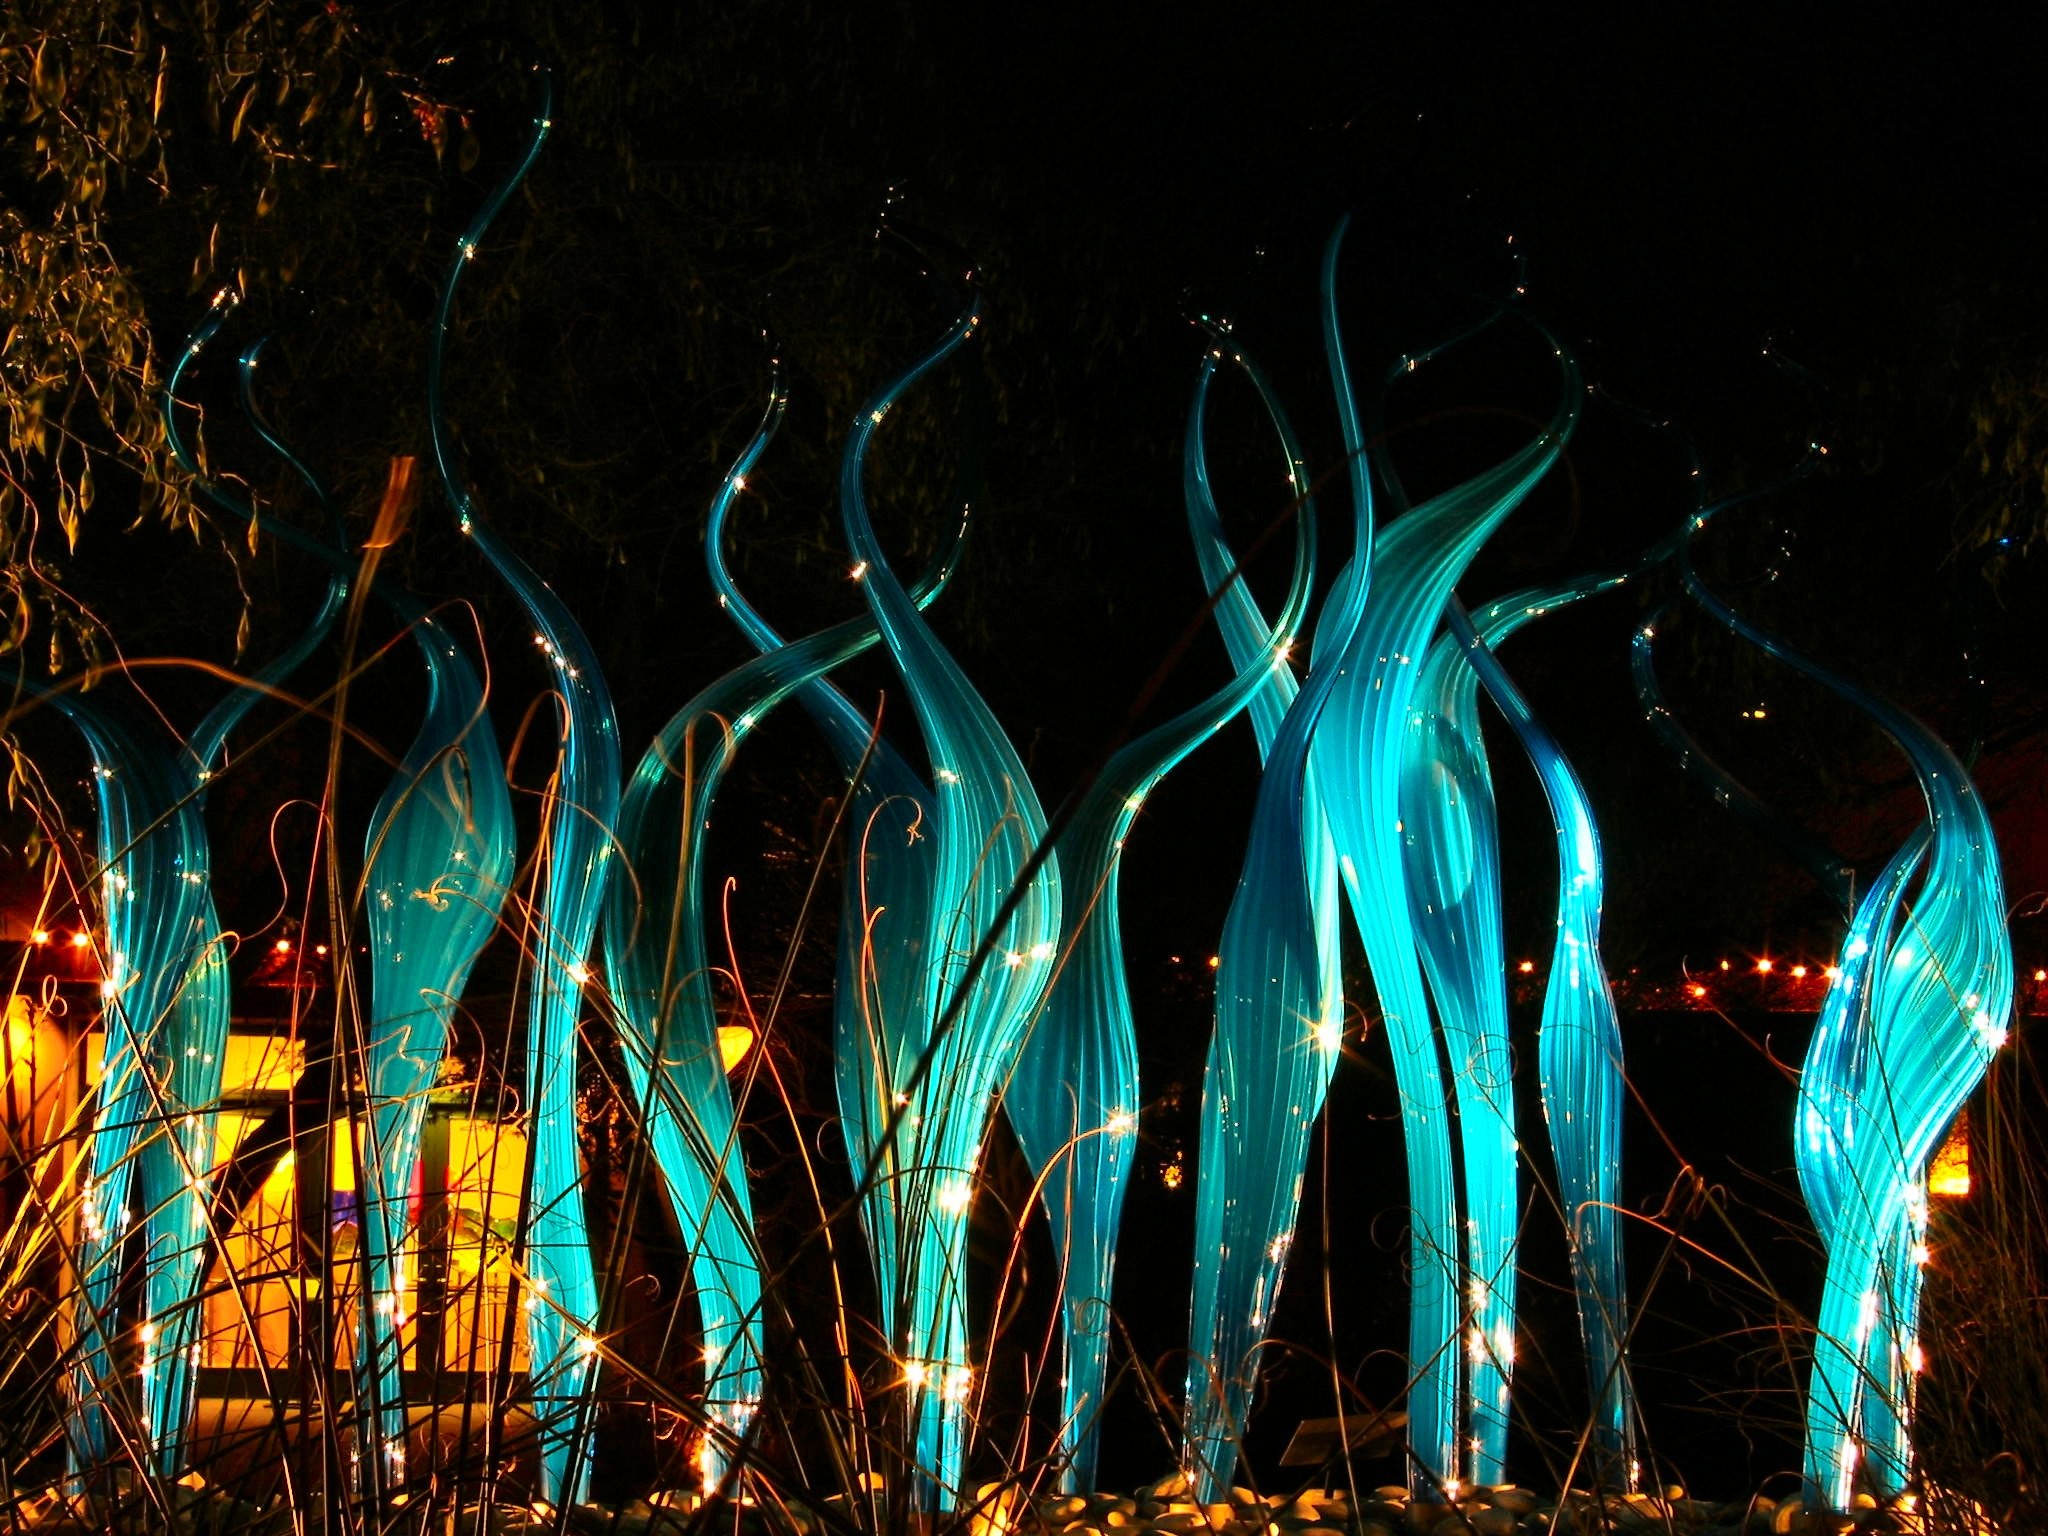 2048x1536 Chihuly Glass Sculpture exhibit at the Desert Botanical Gardens in Arizona  - soul-amp.